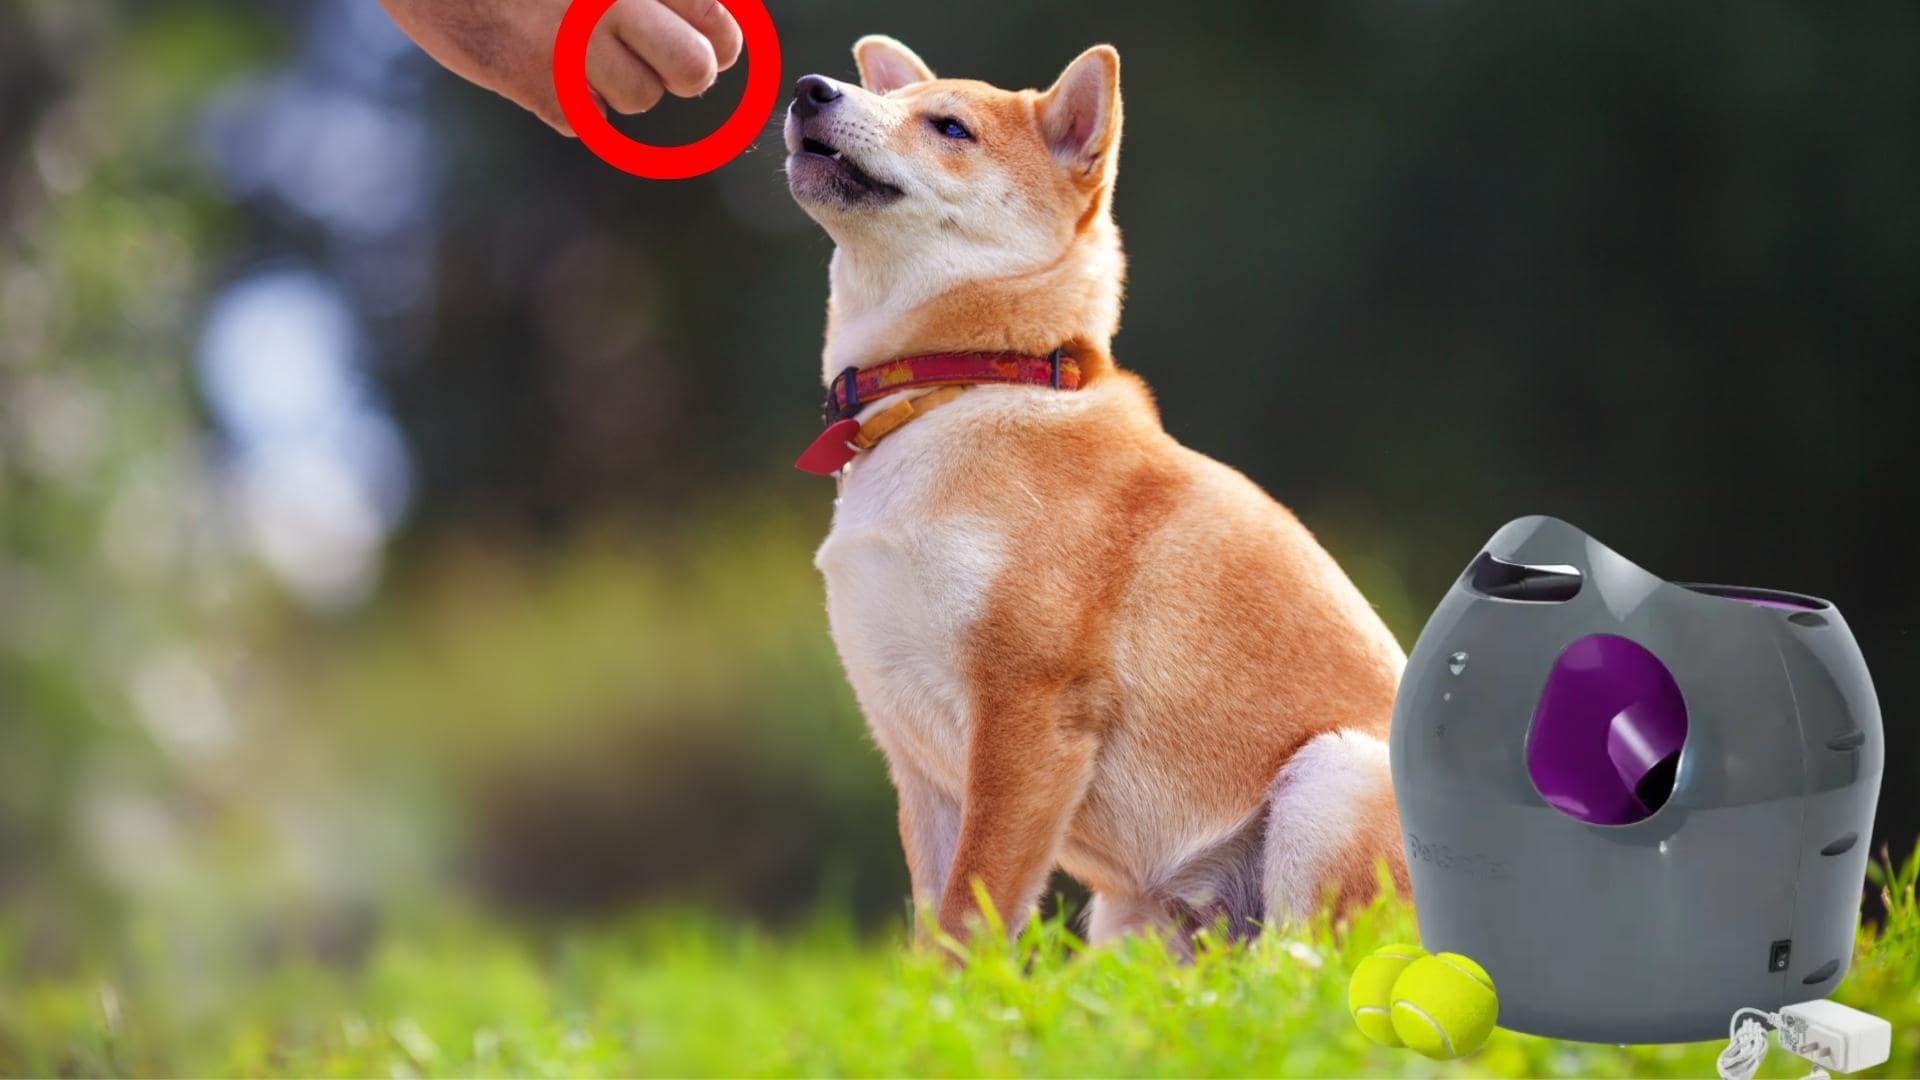 How To Teach a Dog To Use An Automatic Ball Launcher